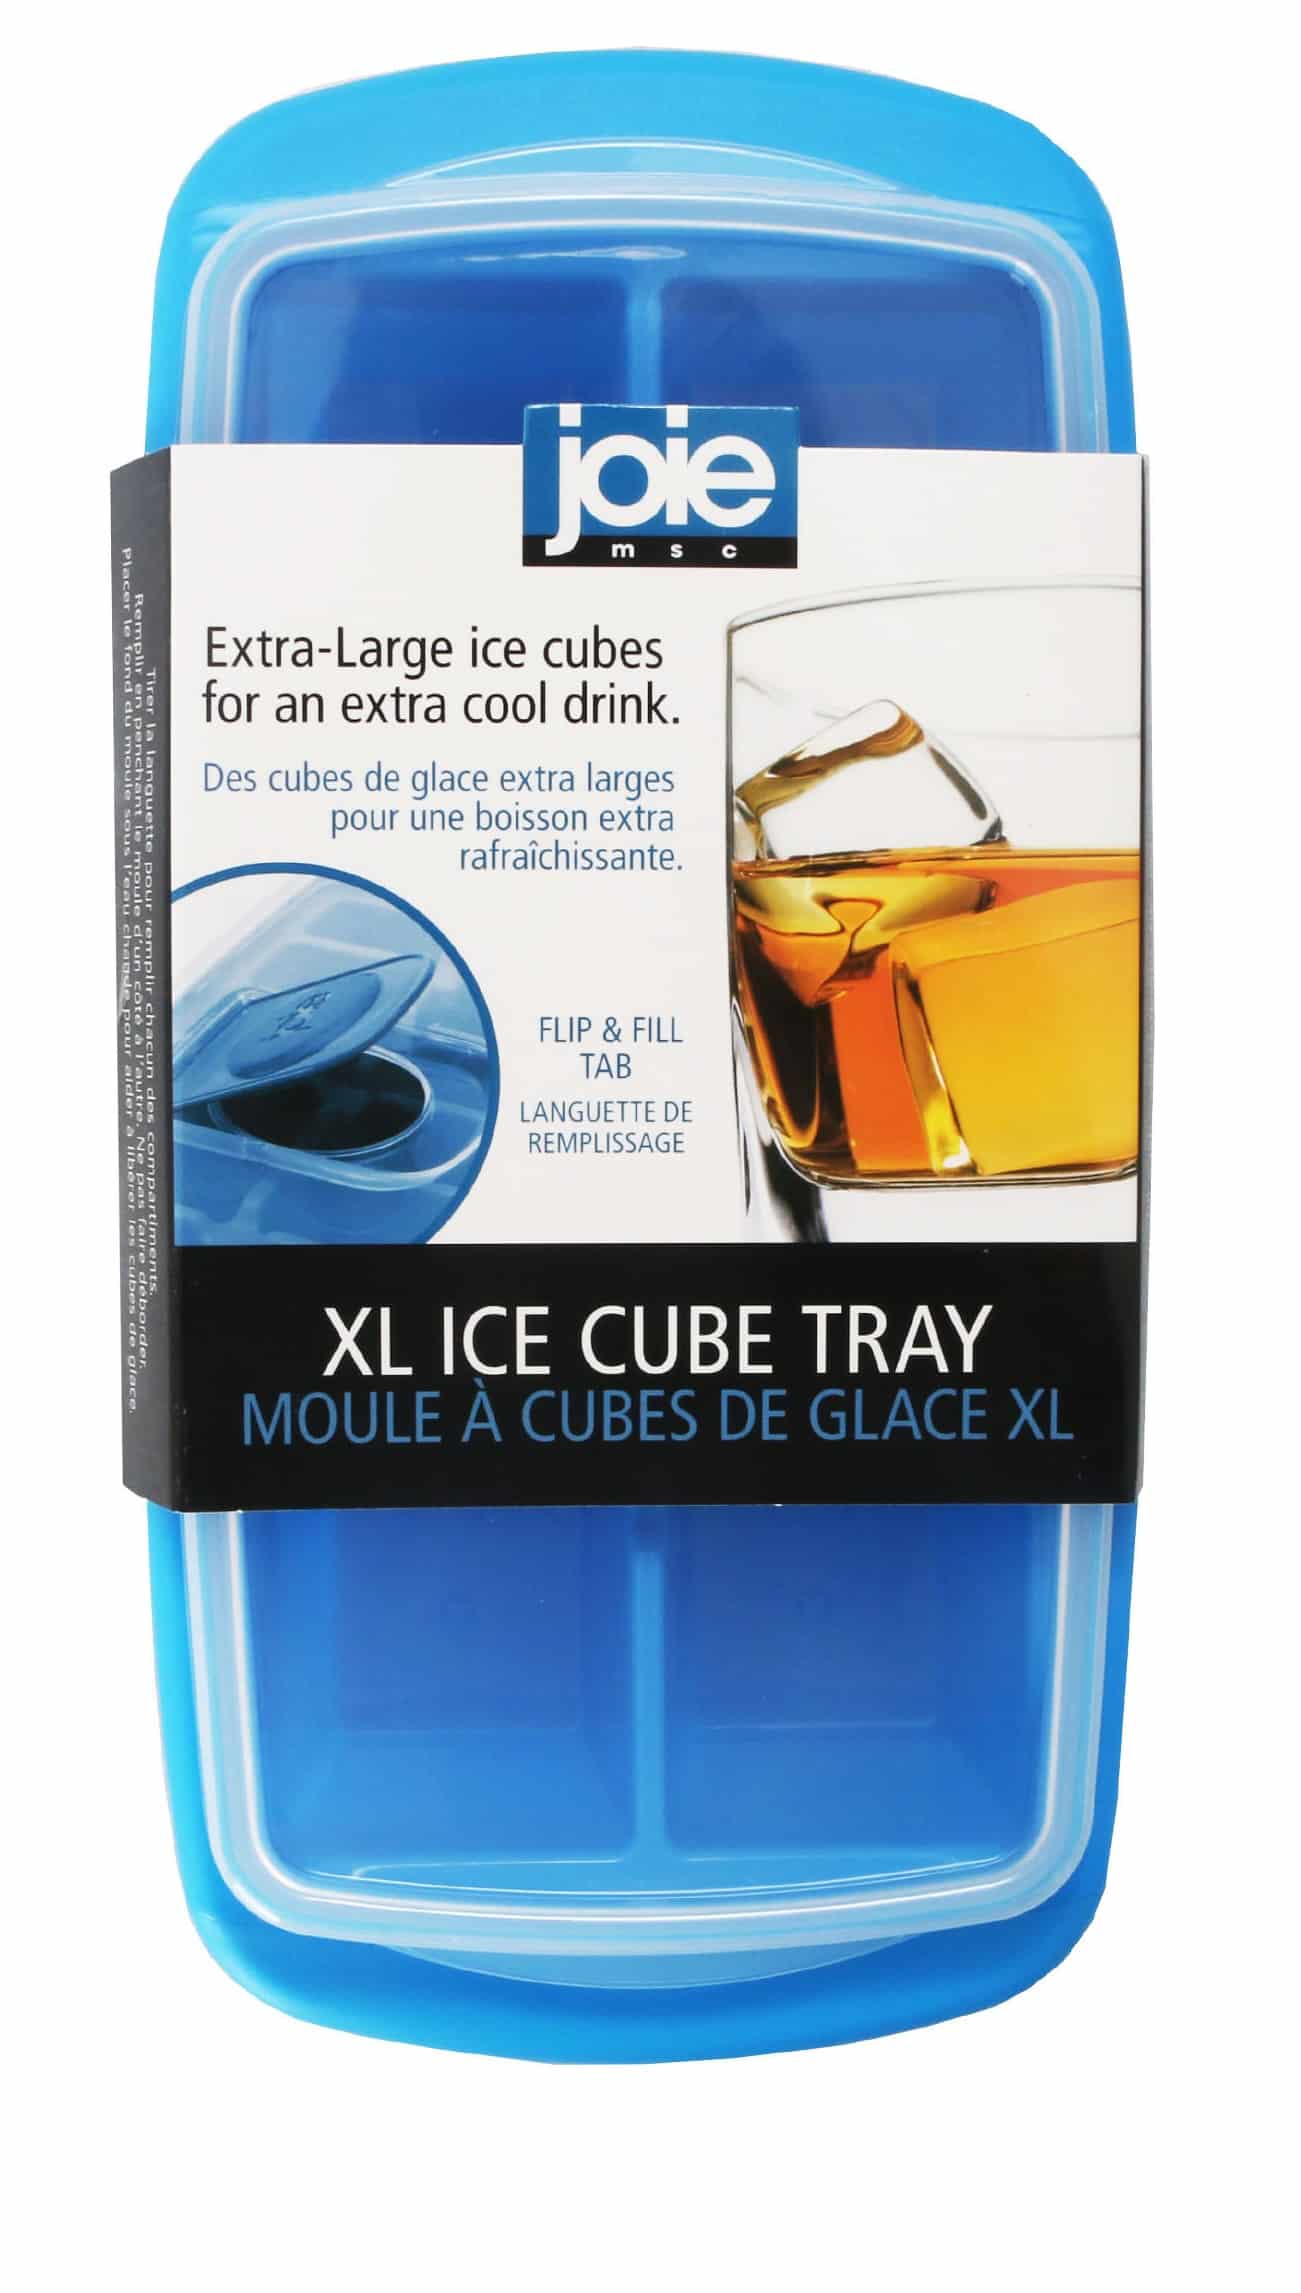 Joie Ice Cube Tray Extra Large Blue